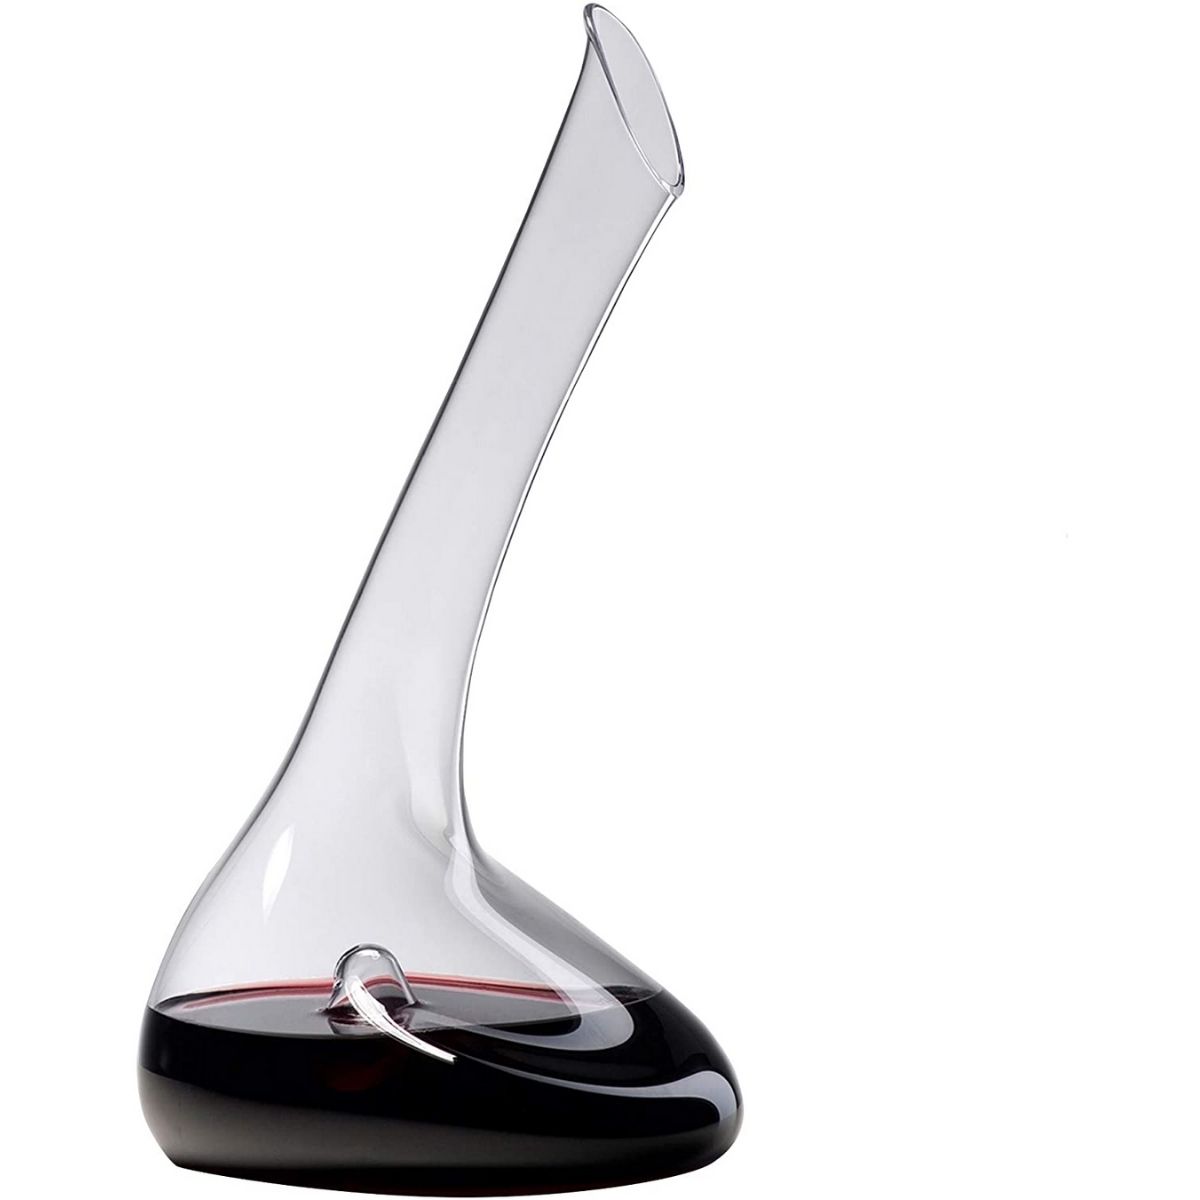 The Best Gifts for Wine Lovers Option: Riedel Crystal Flirt Decanter